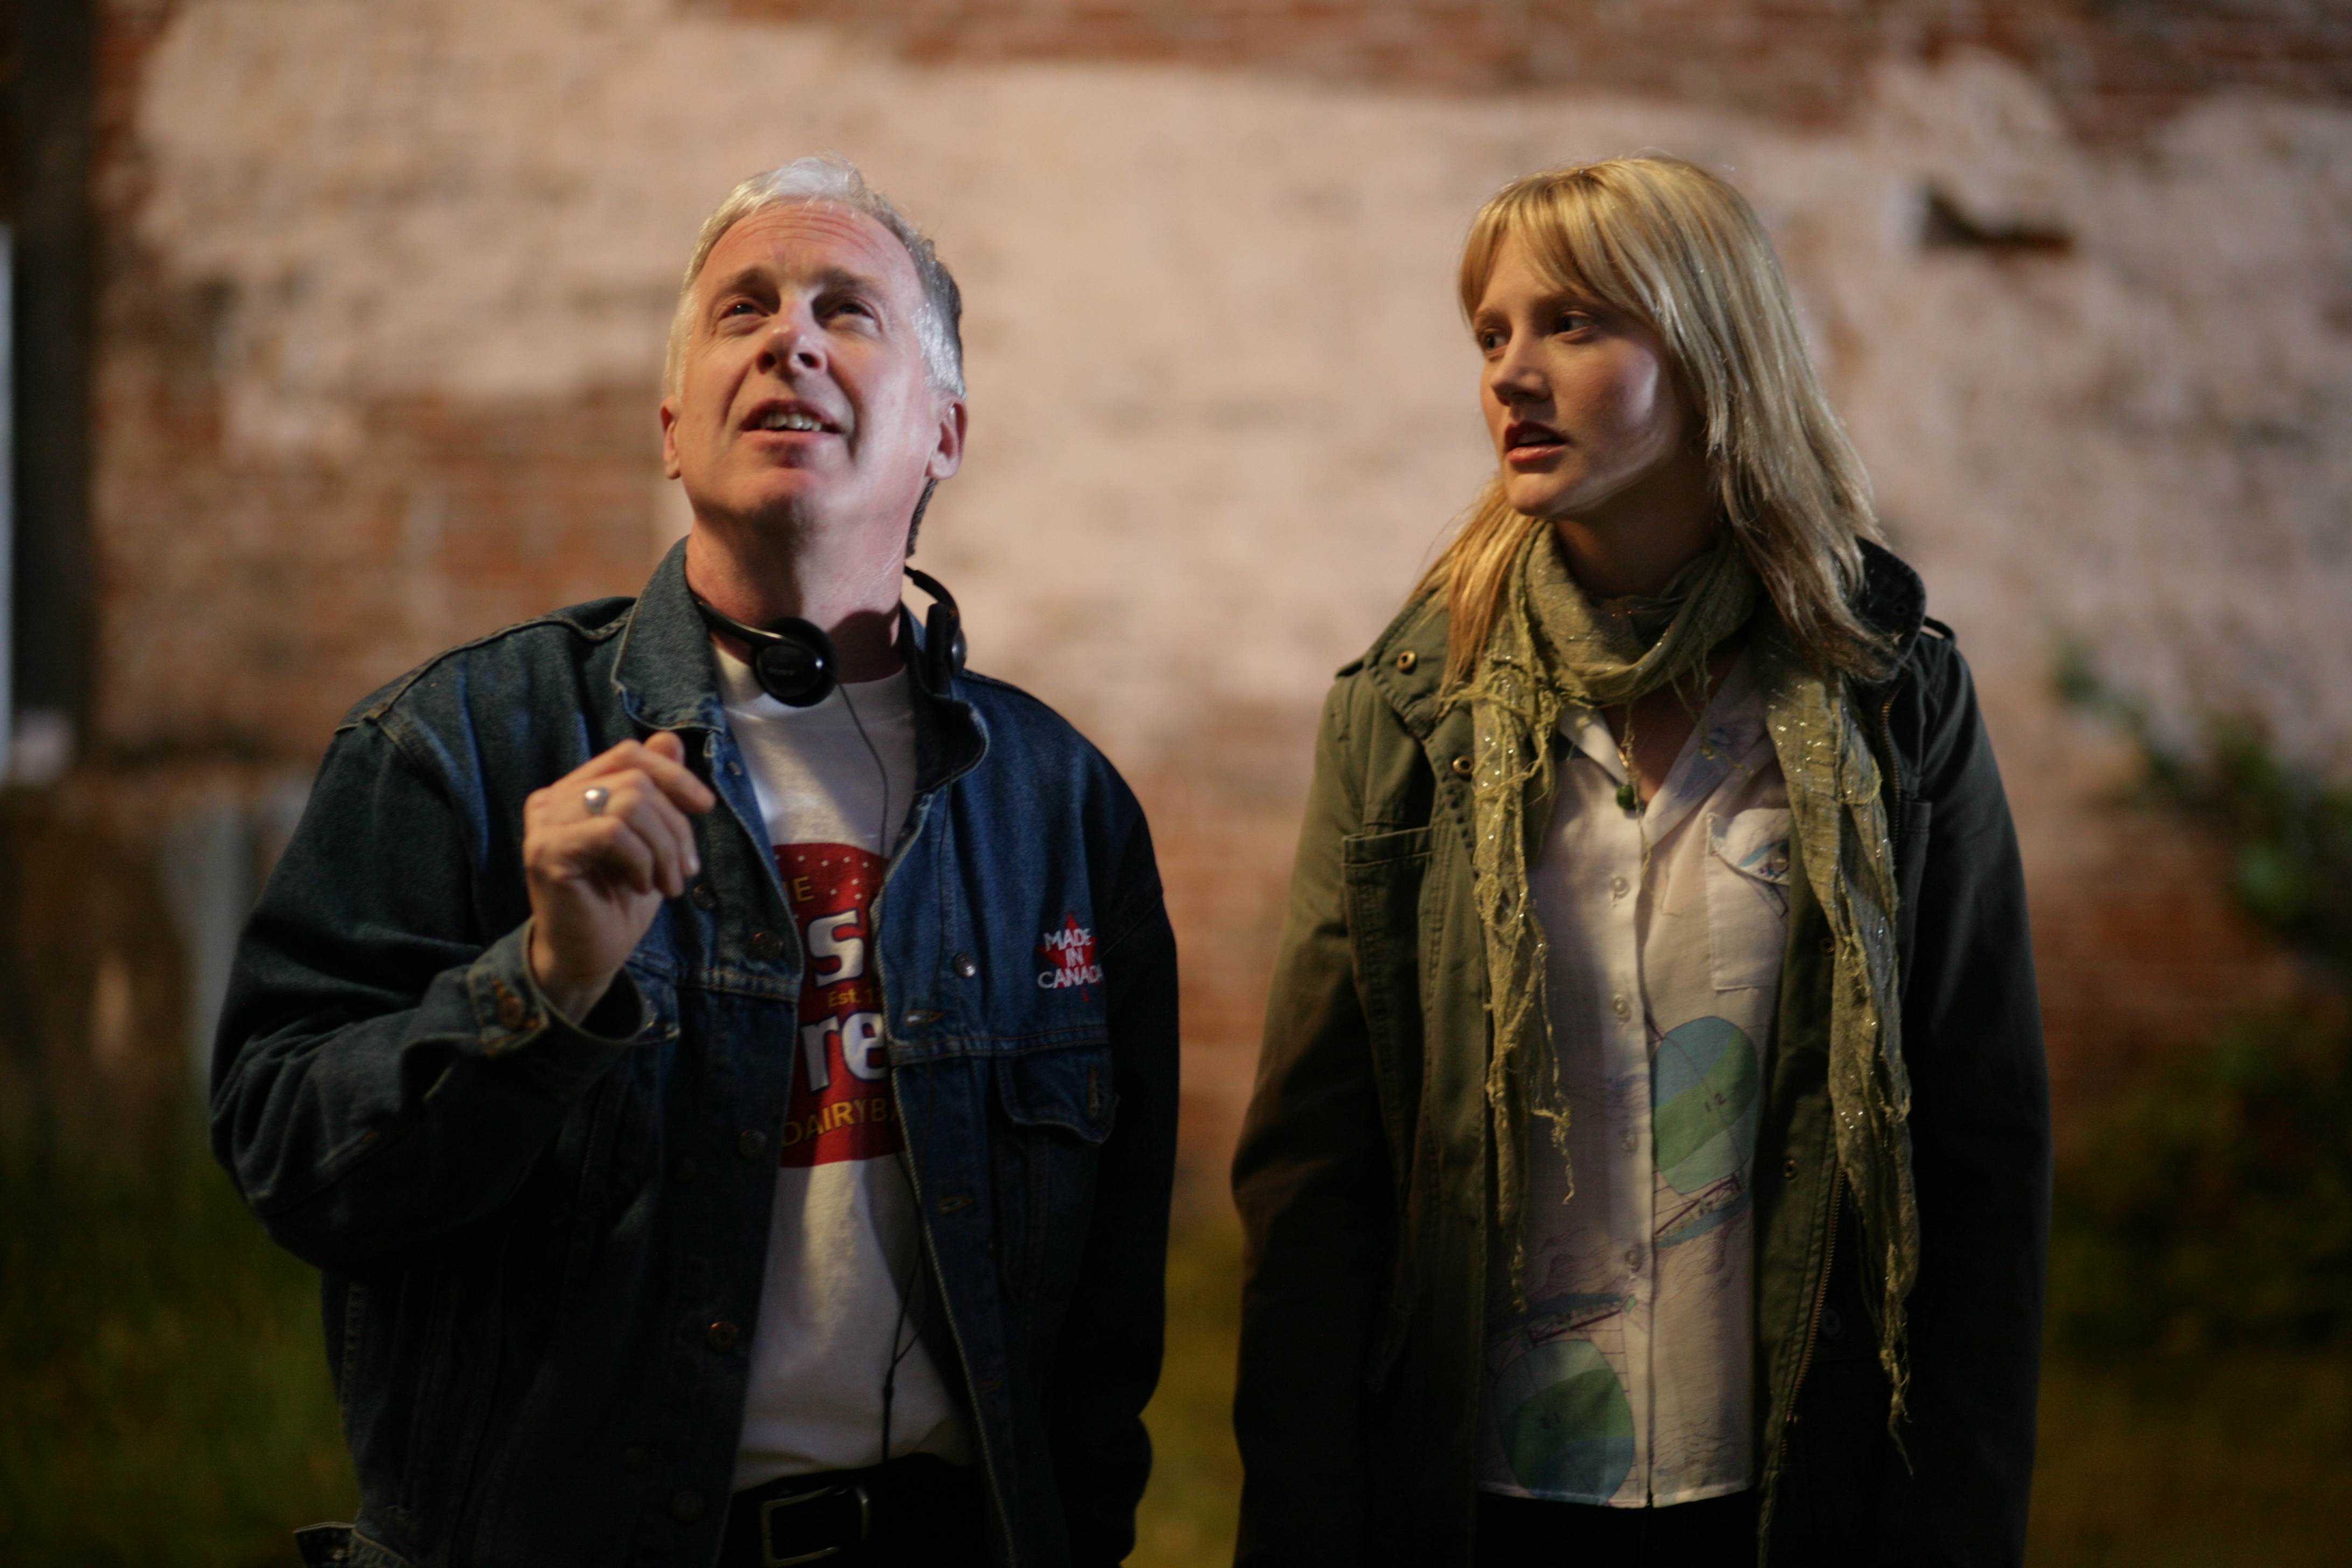 Michael Kennedy directs Sonja Bennett on the set of 